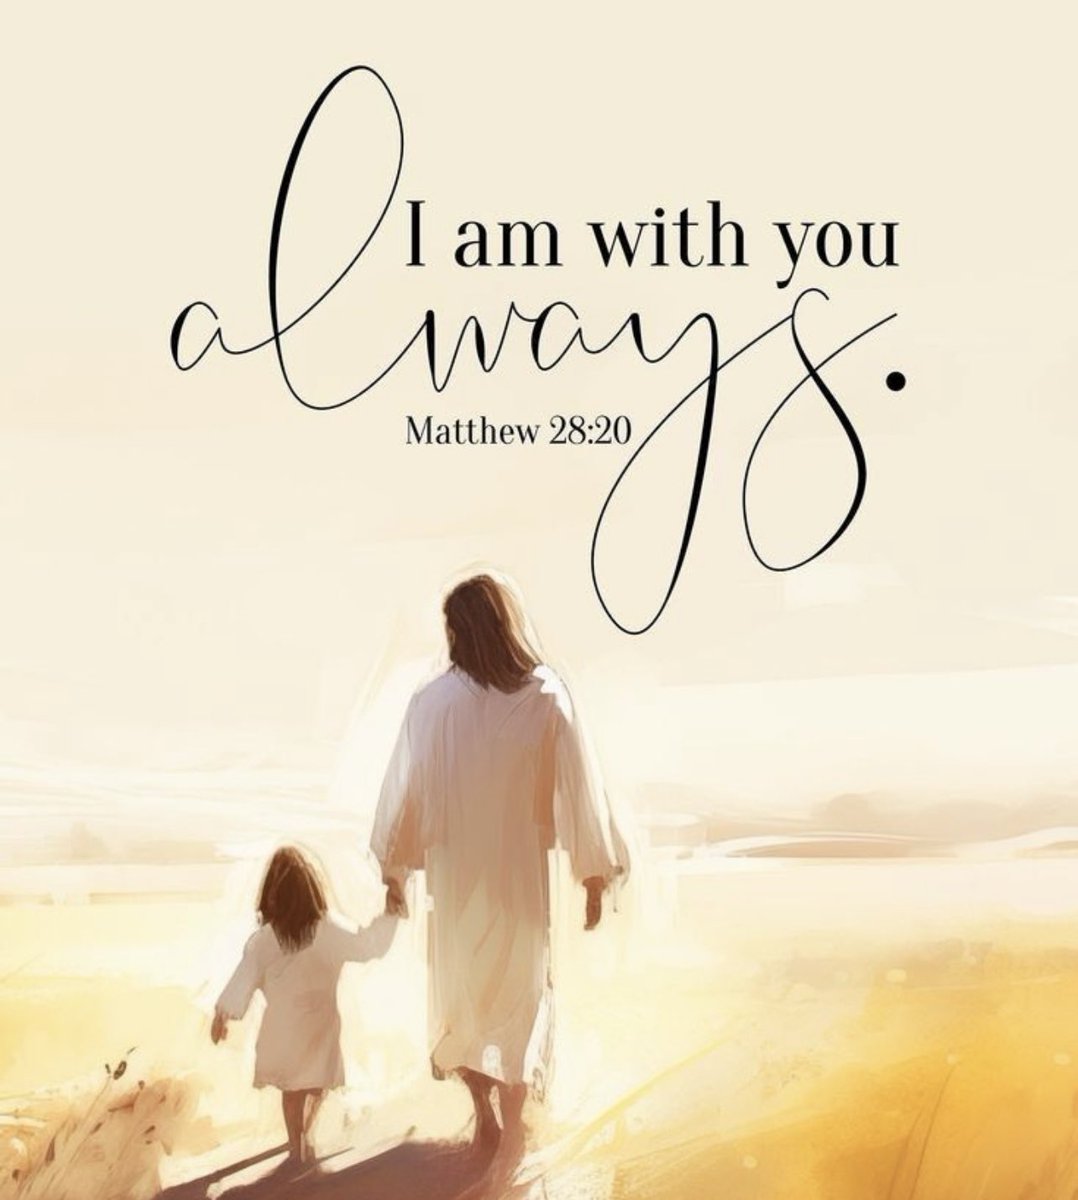 “I am with you always, even unto the end of the world. Amen.”

Matthew 28:20